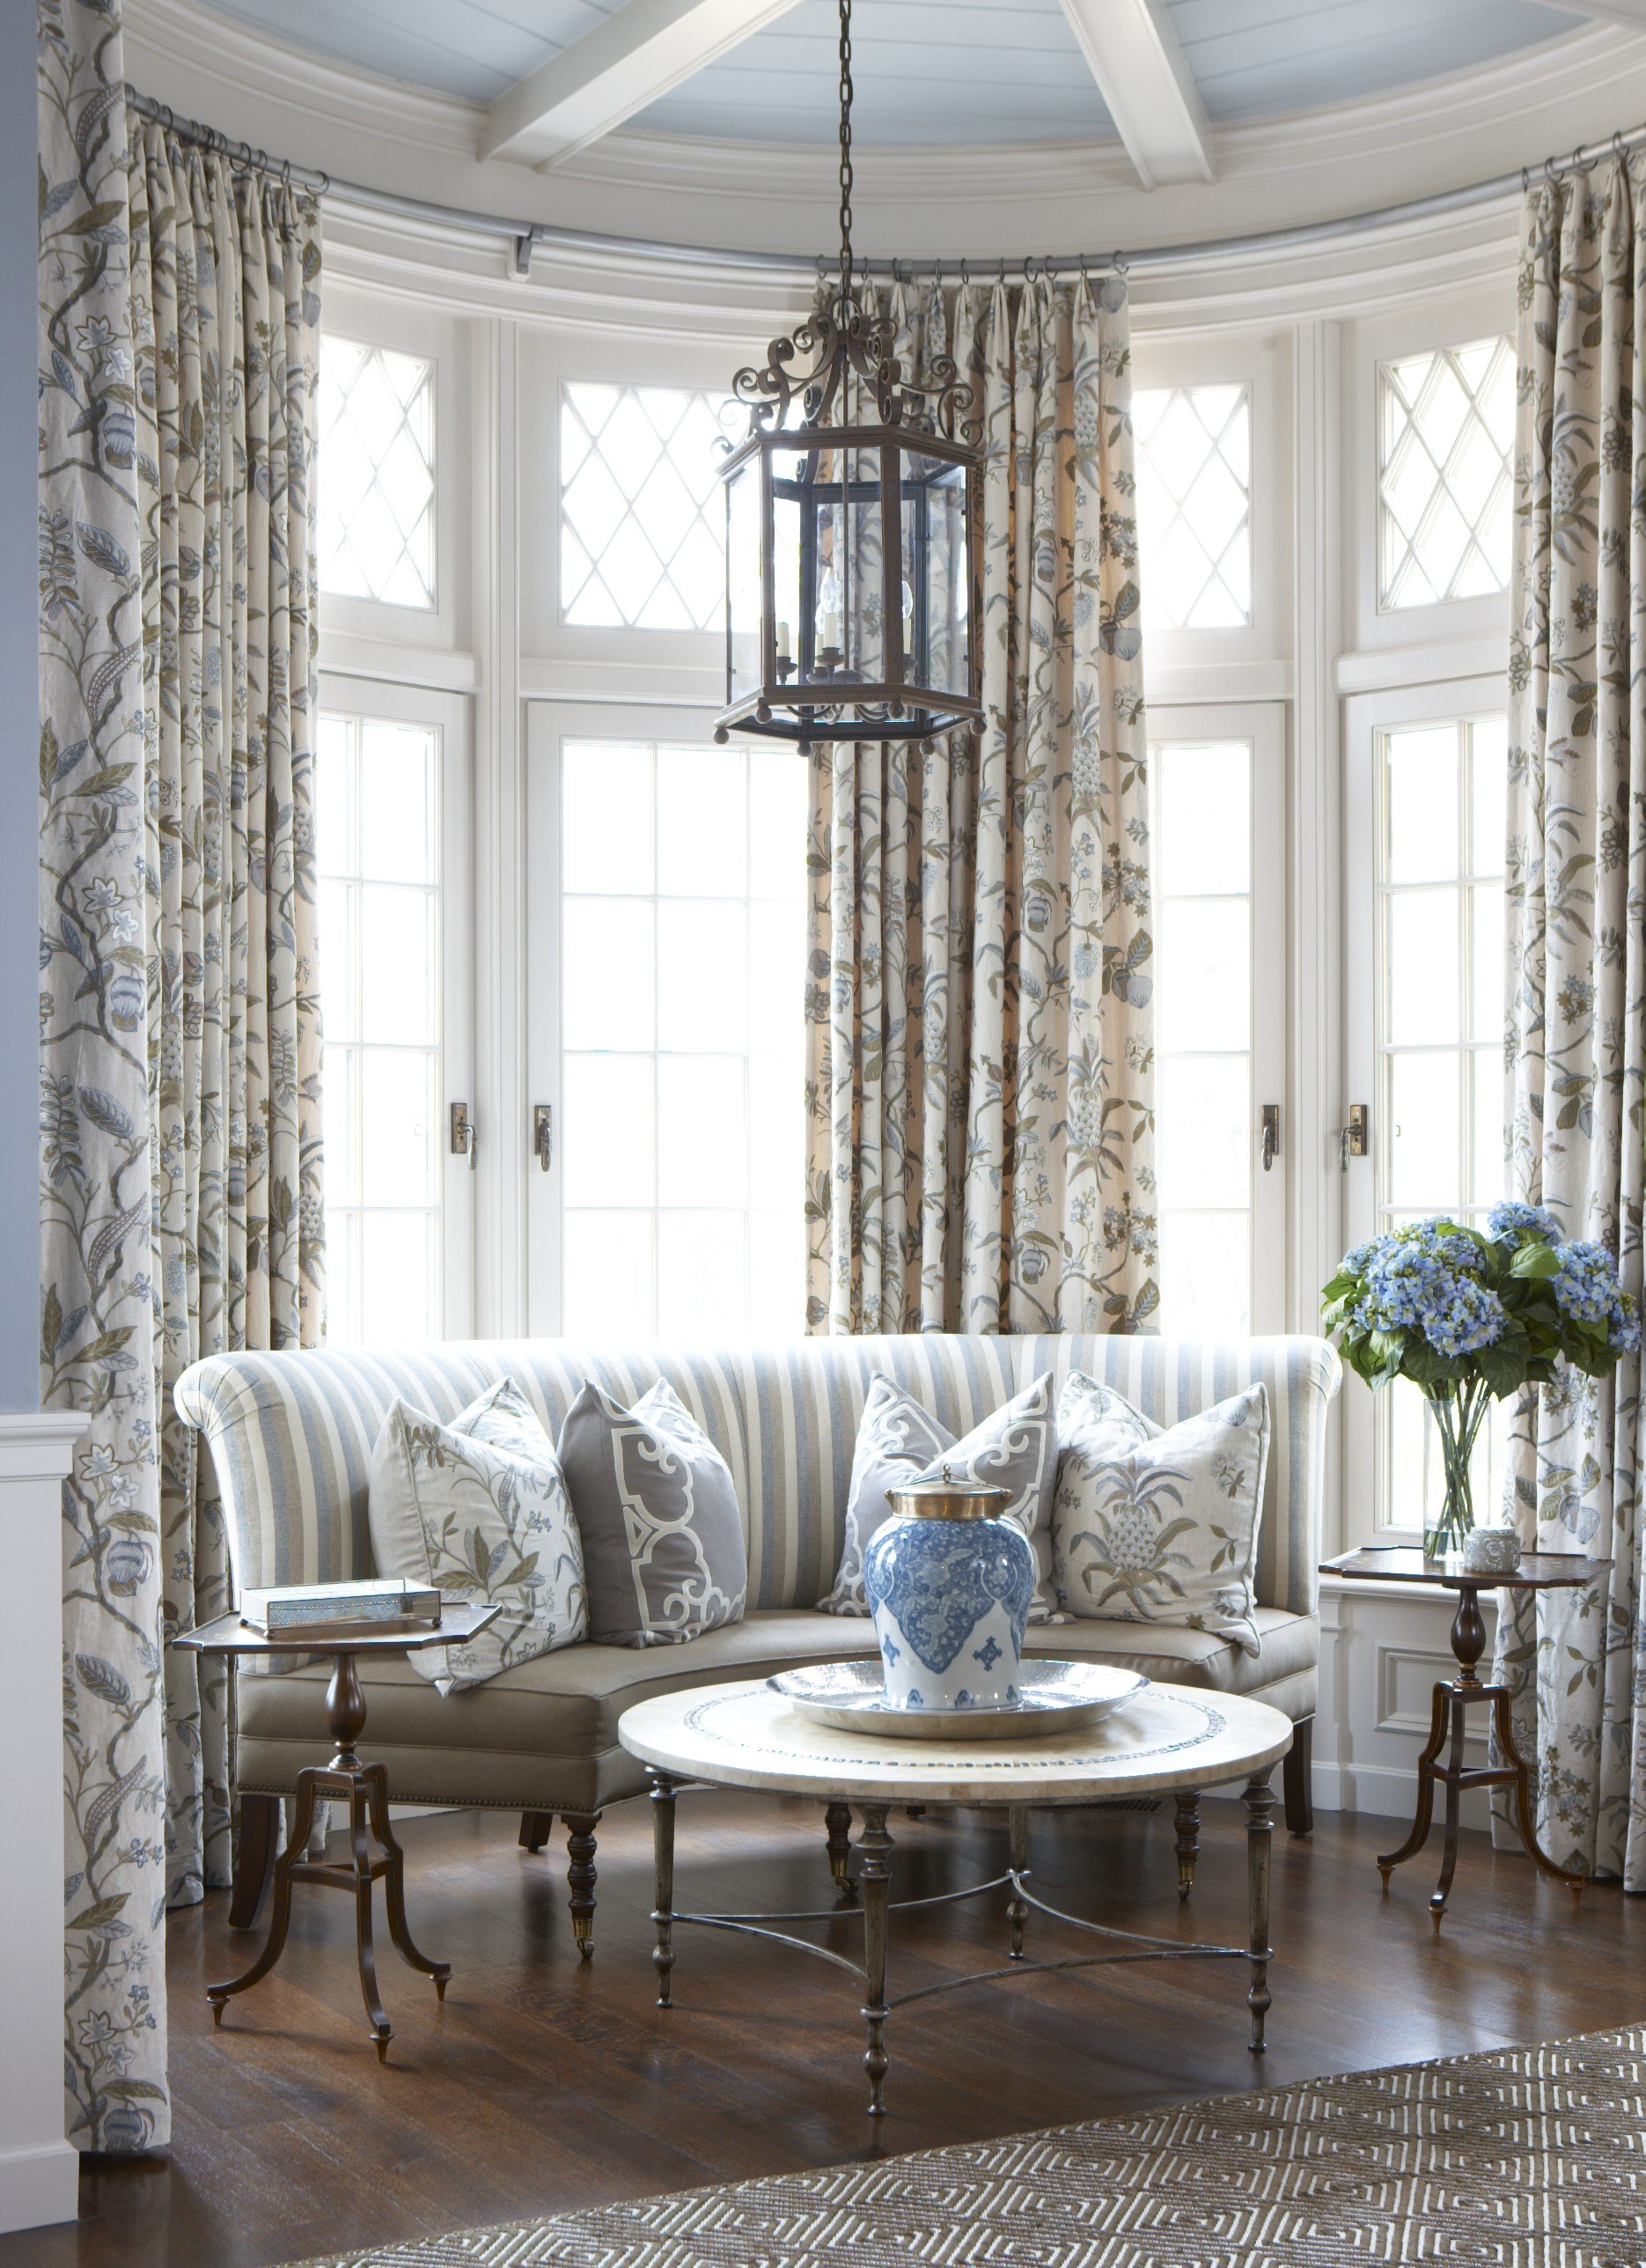 14-tall-window-pattern-blue-detailed-curtains-textured-lounge-area-white-blue-accents-rinfret-interior-designs.jpg